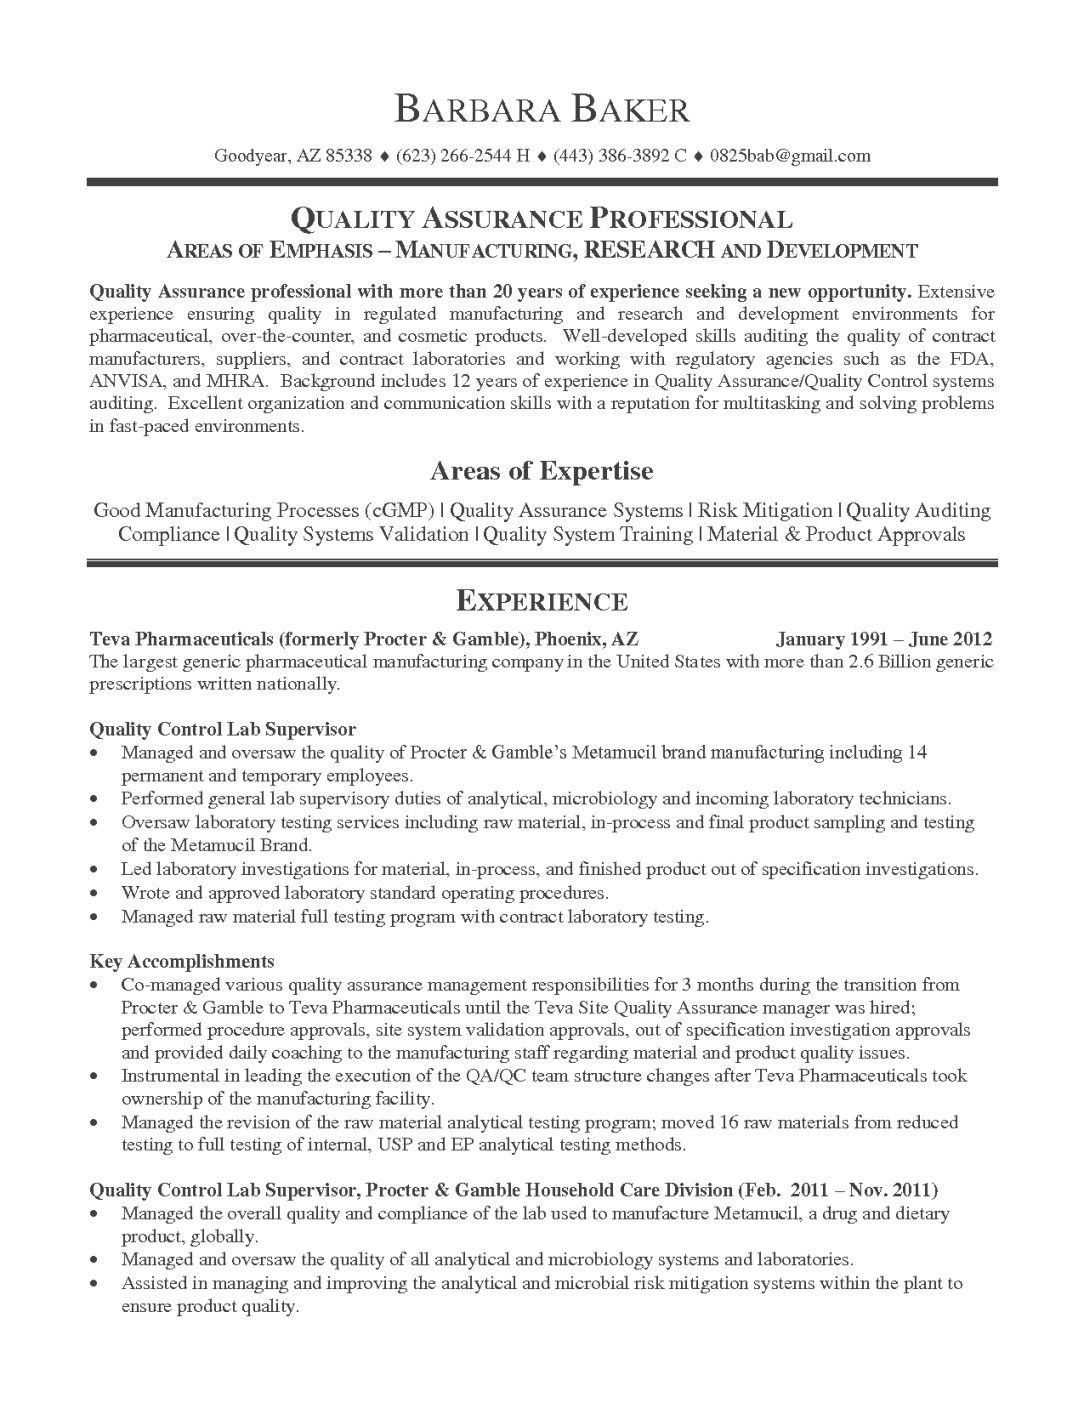 Sample Resume for Lab Manager Position Photo Lab Manager Resume October 2021